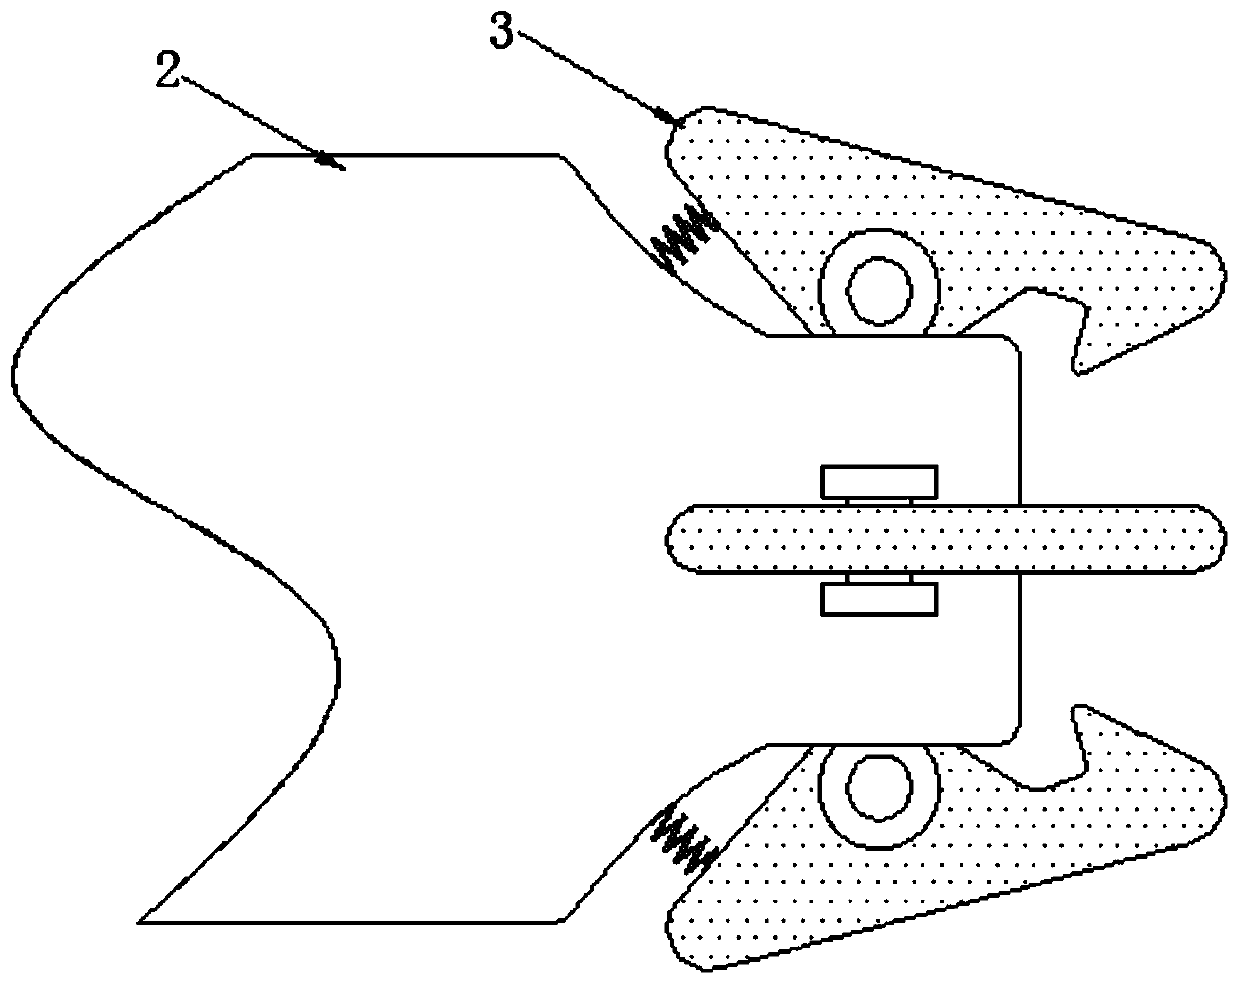 Spinning yarn conveying tensioning device capable of automatically adjusting spinning yarns to prevent slacking